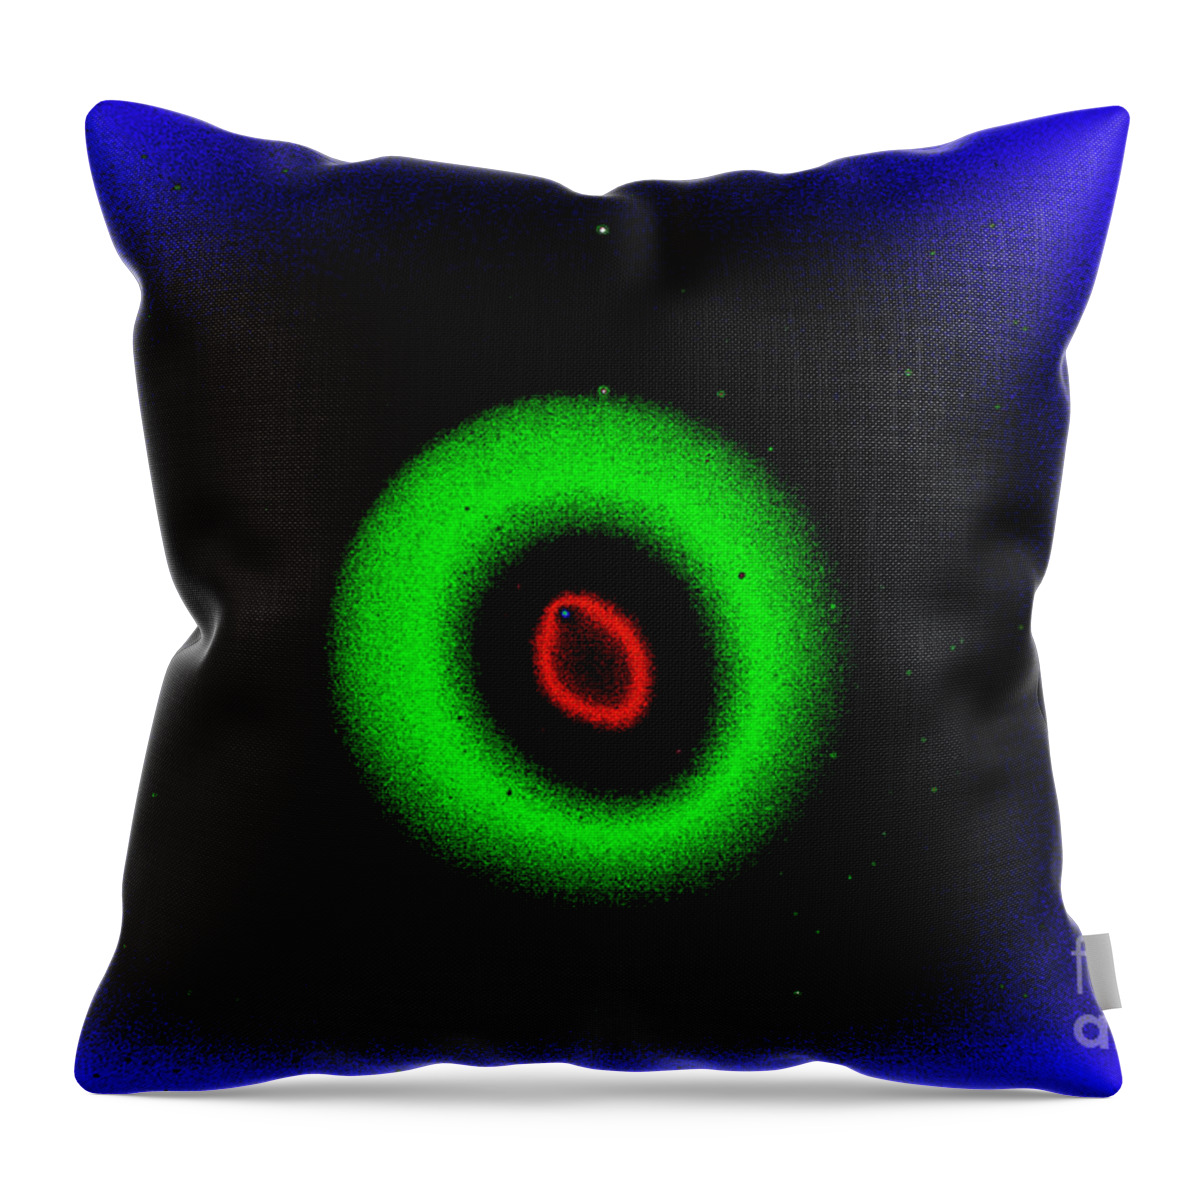 Comets Throw Pillow featuring the photograph Comet Holmes In Outburst #1 by John Chumack